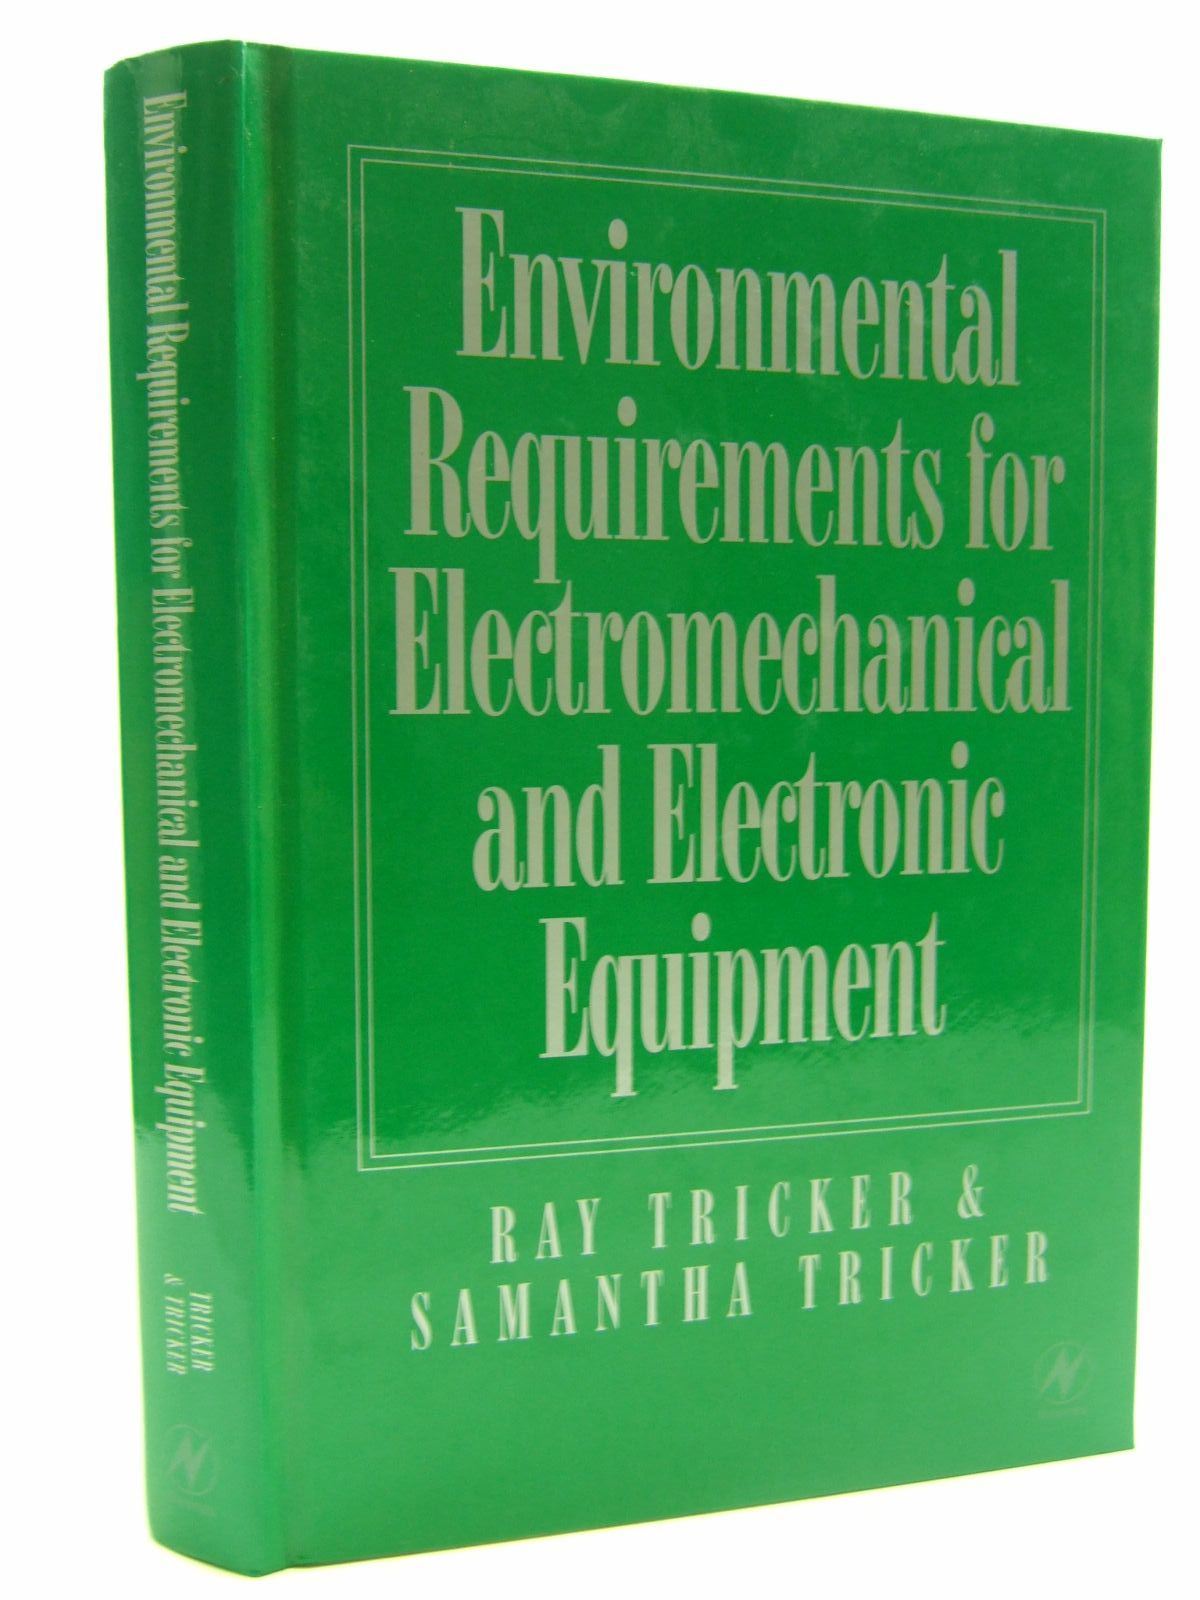 Photo of ENVIRONMENTAL REQUIREMENTS FOR ELECTROMECHANICAL AND ELECTRONIC EQUIPMENT written by Tricker, Ray Tricker, Samantha published by Newnes (STOCK CODE: 1707643)  for sale by Stella & Rose's Books